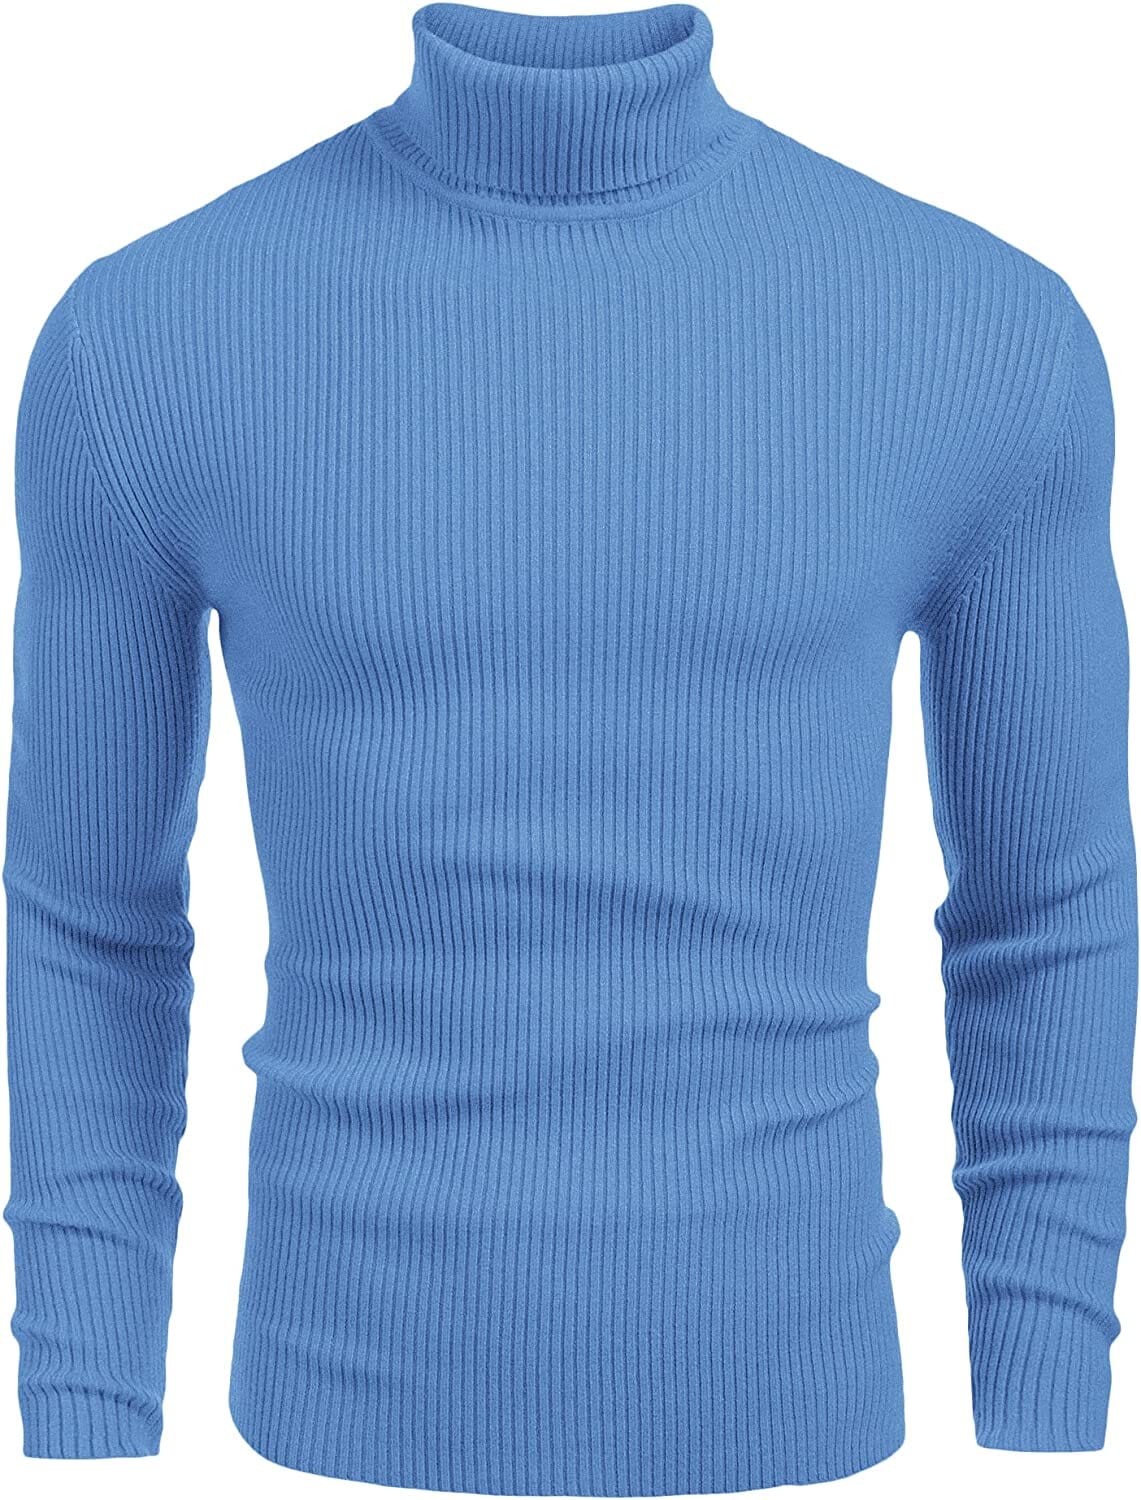 Ribbed Slim Fit Knitted Pullover Turtleneck Sweater (US Only) Sweaters COOFANDY Store Cornflower Blue S 